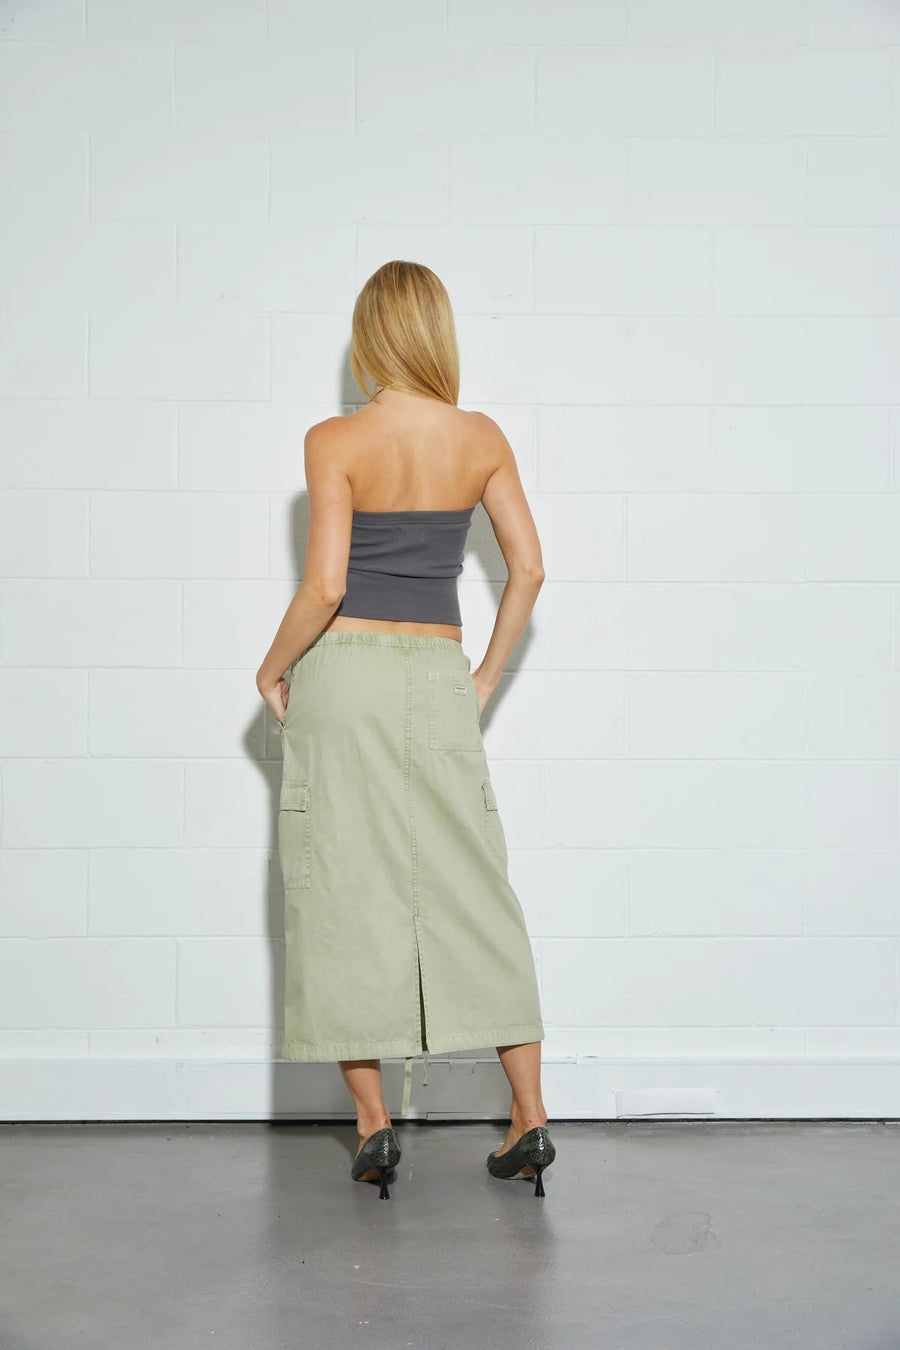 Abrand - Utility Skirt in Sage